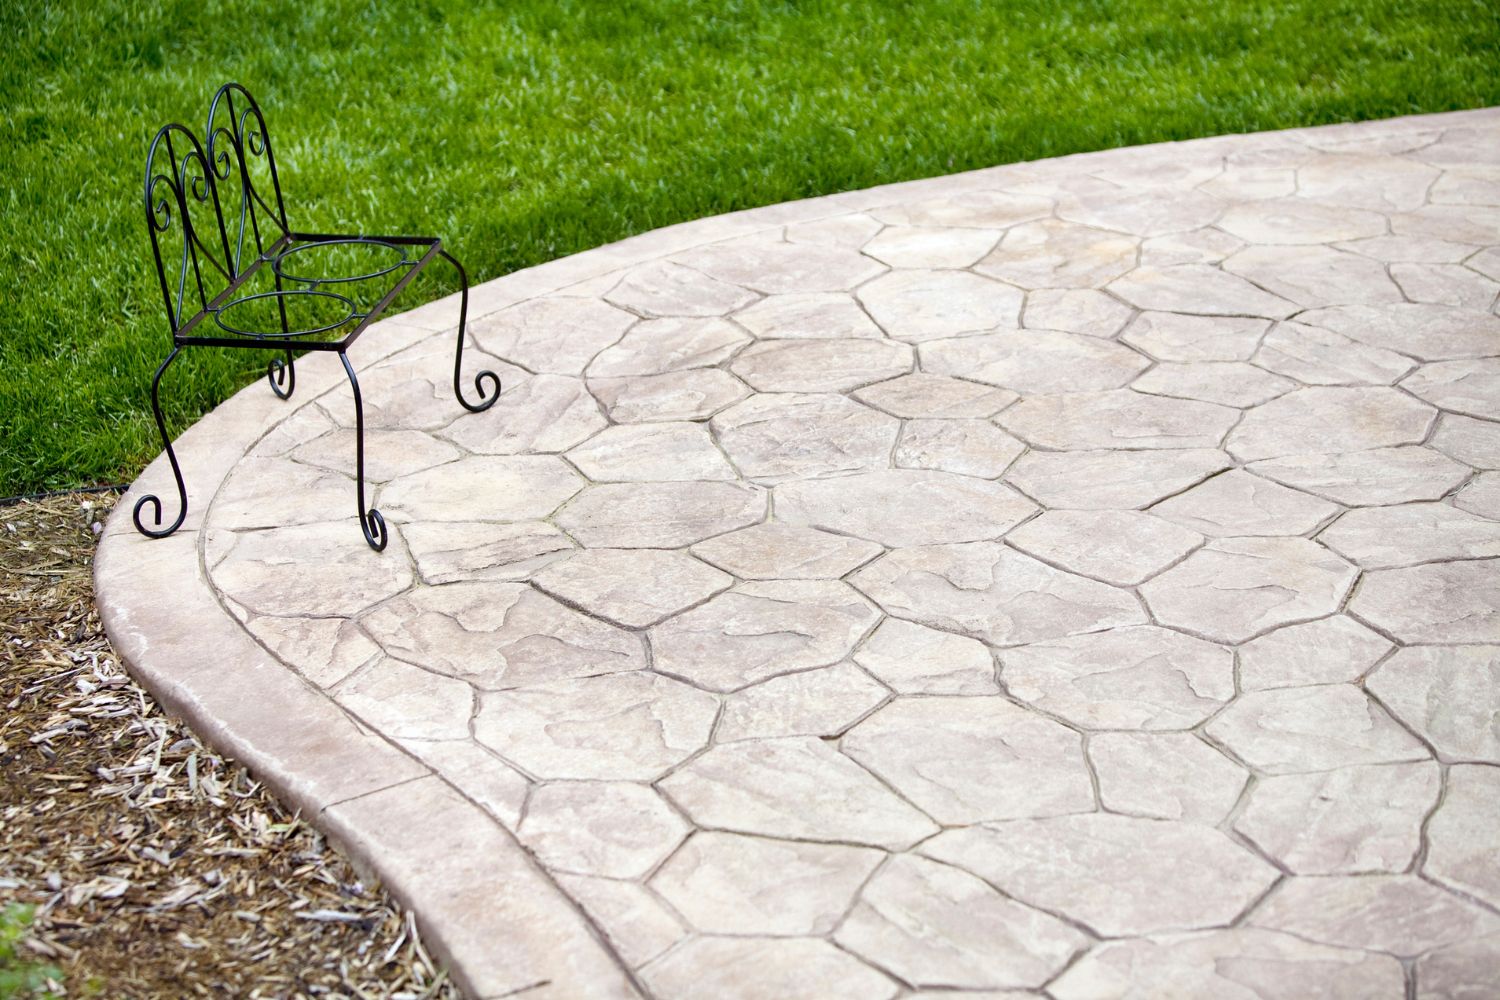 Part of a rounded stamped concrete patio with an iron chair next to a well-manicured lawn.